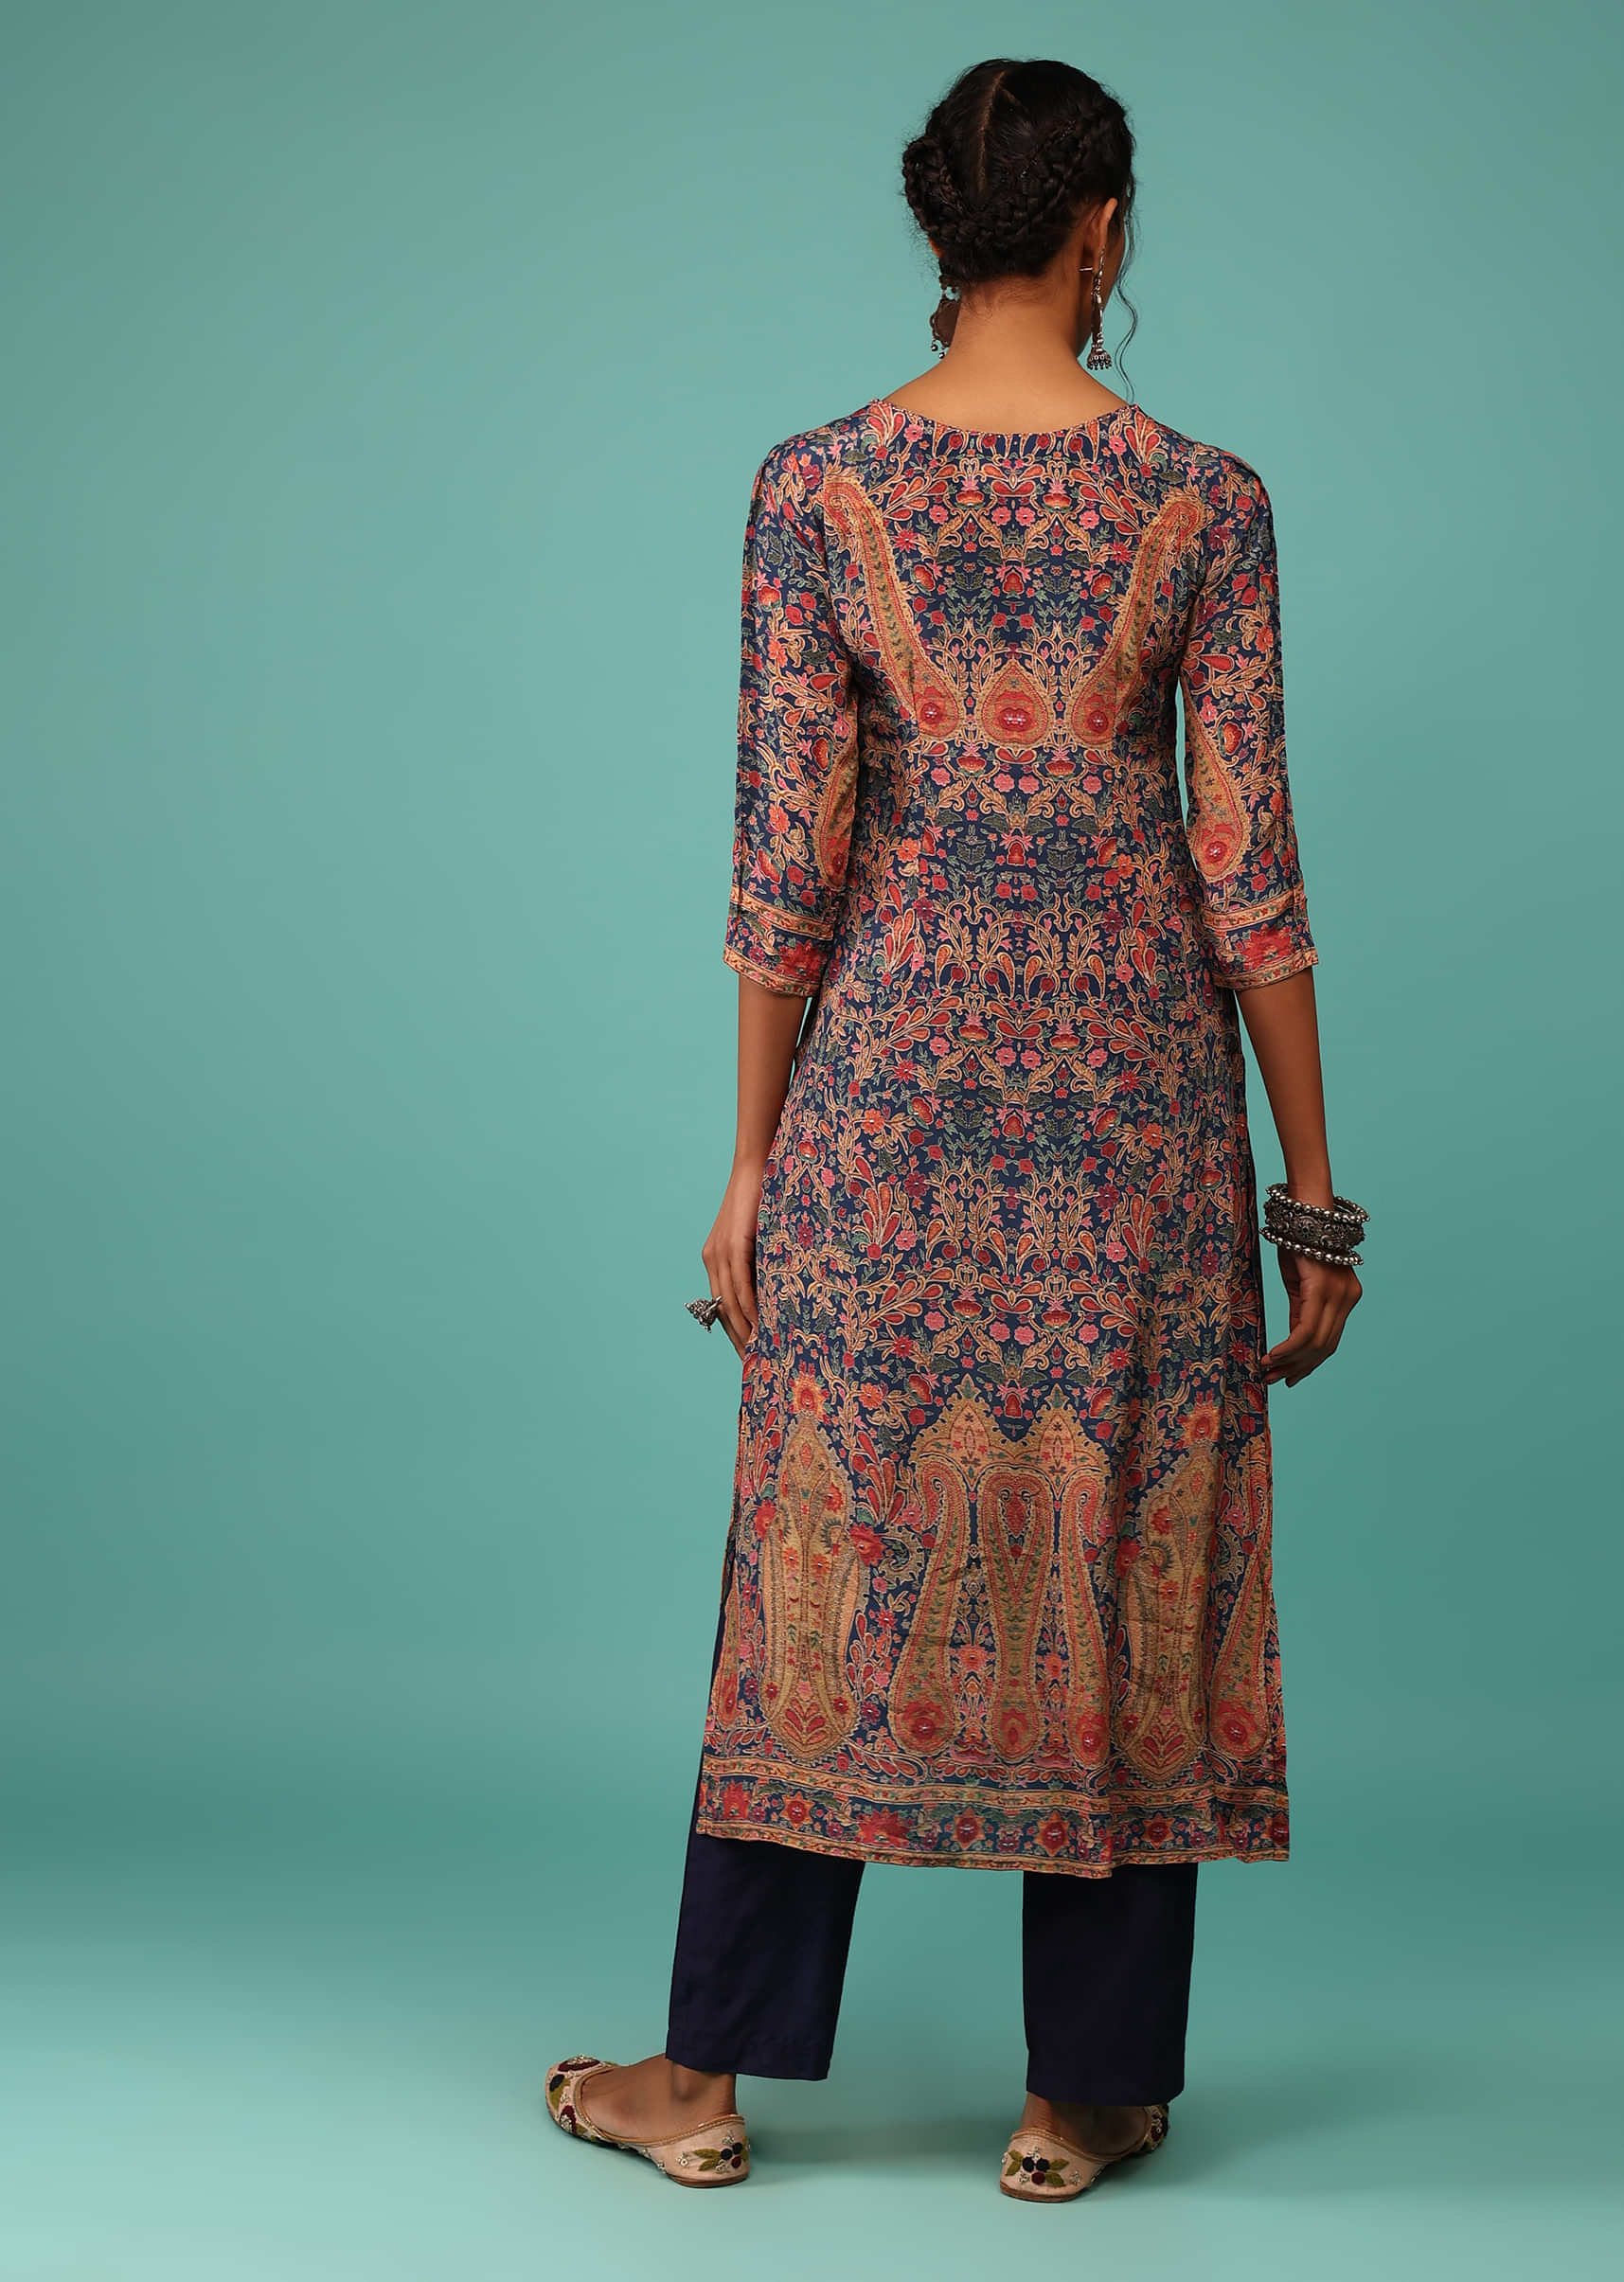 Teal Blue Kurta In Crepe With Kashmiri Floral Print And Embroidery